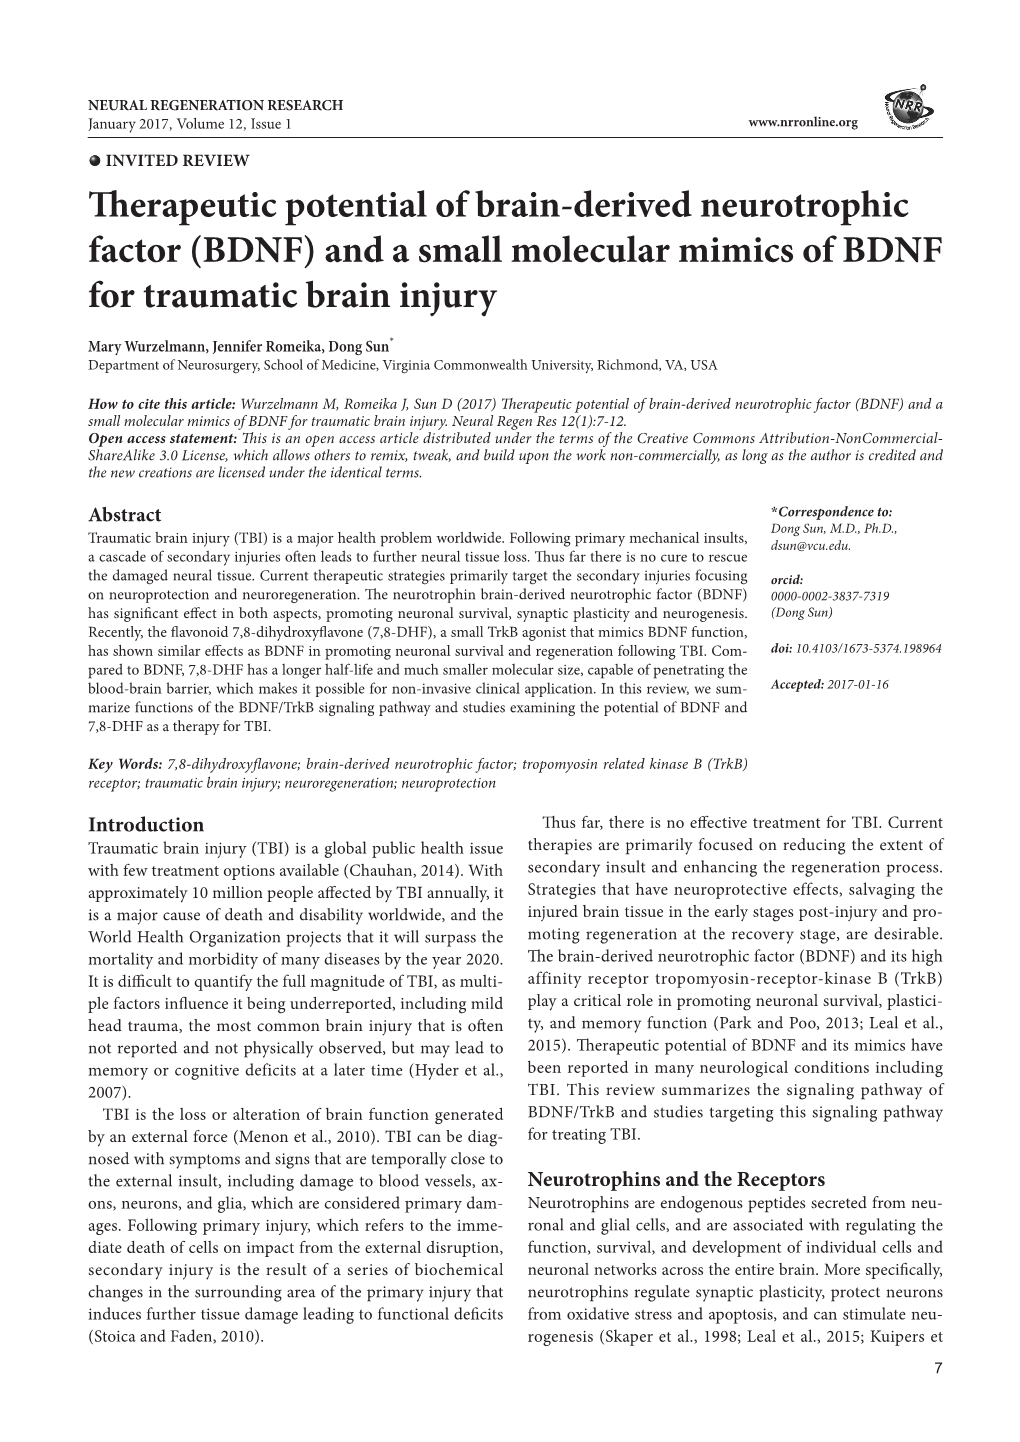 Therapeutic Potential of Brain-Derived Neurotrophic Factor (BDNF) and a Small Molecular Mimics of BDNF for Traumatic Brain Injury